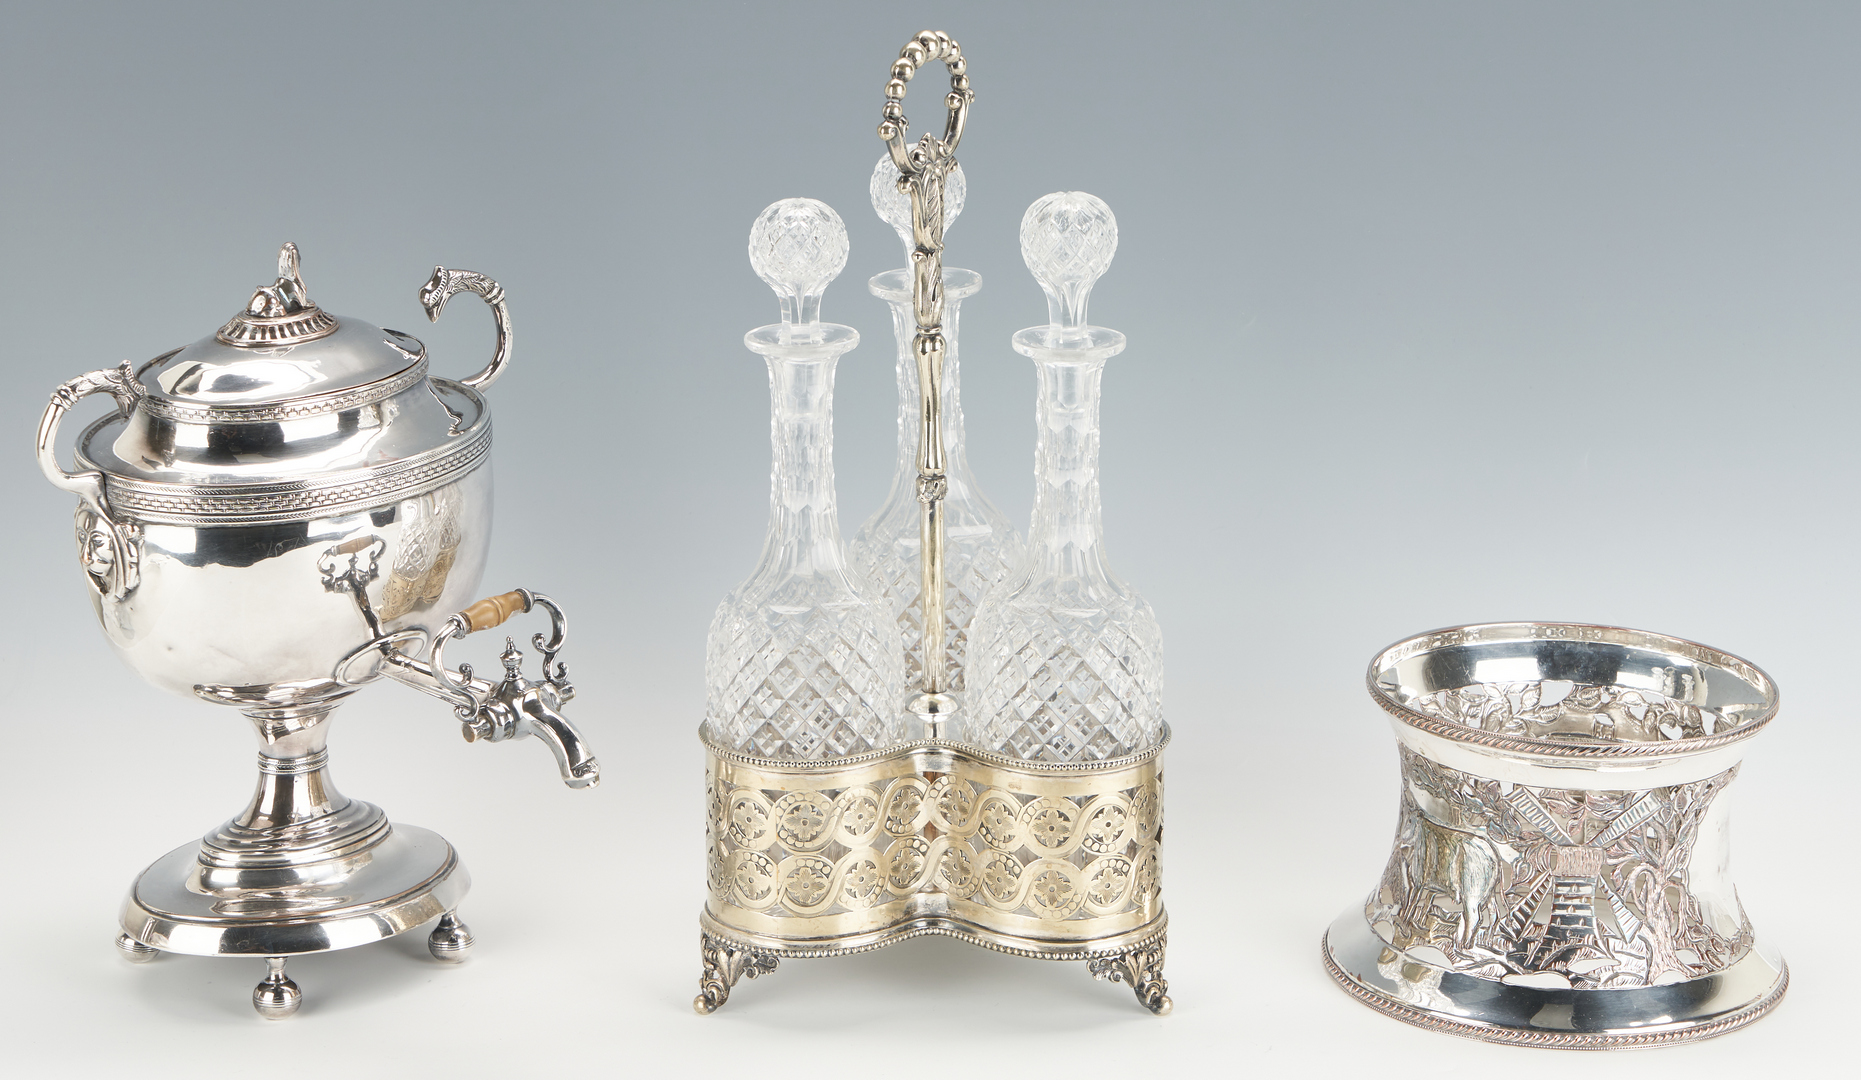 Lot 1168: Silverplated Urn, Bottle Stand, Dish Ring & Christofle Flatware